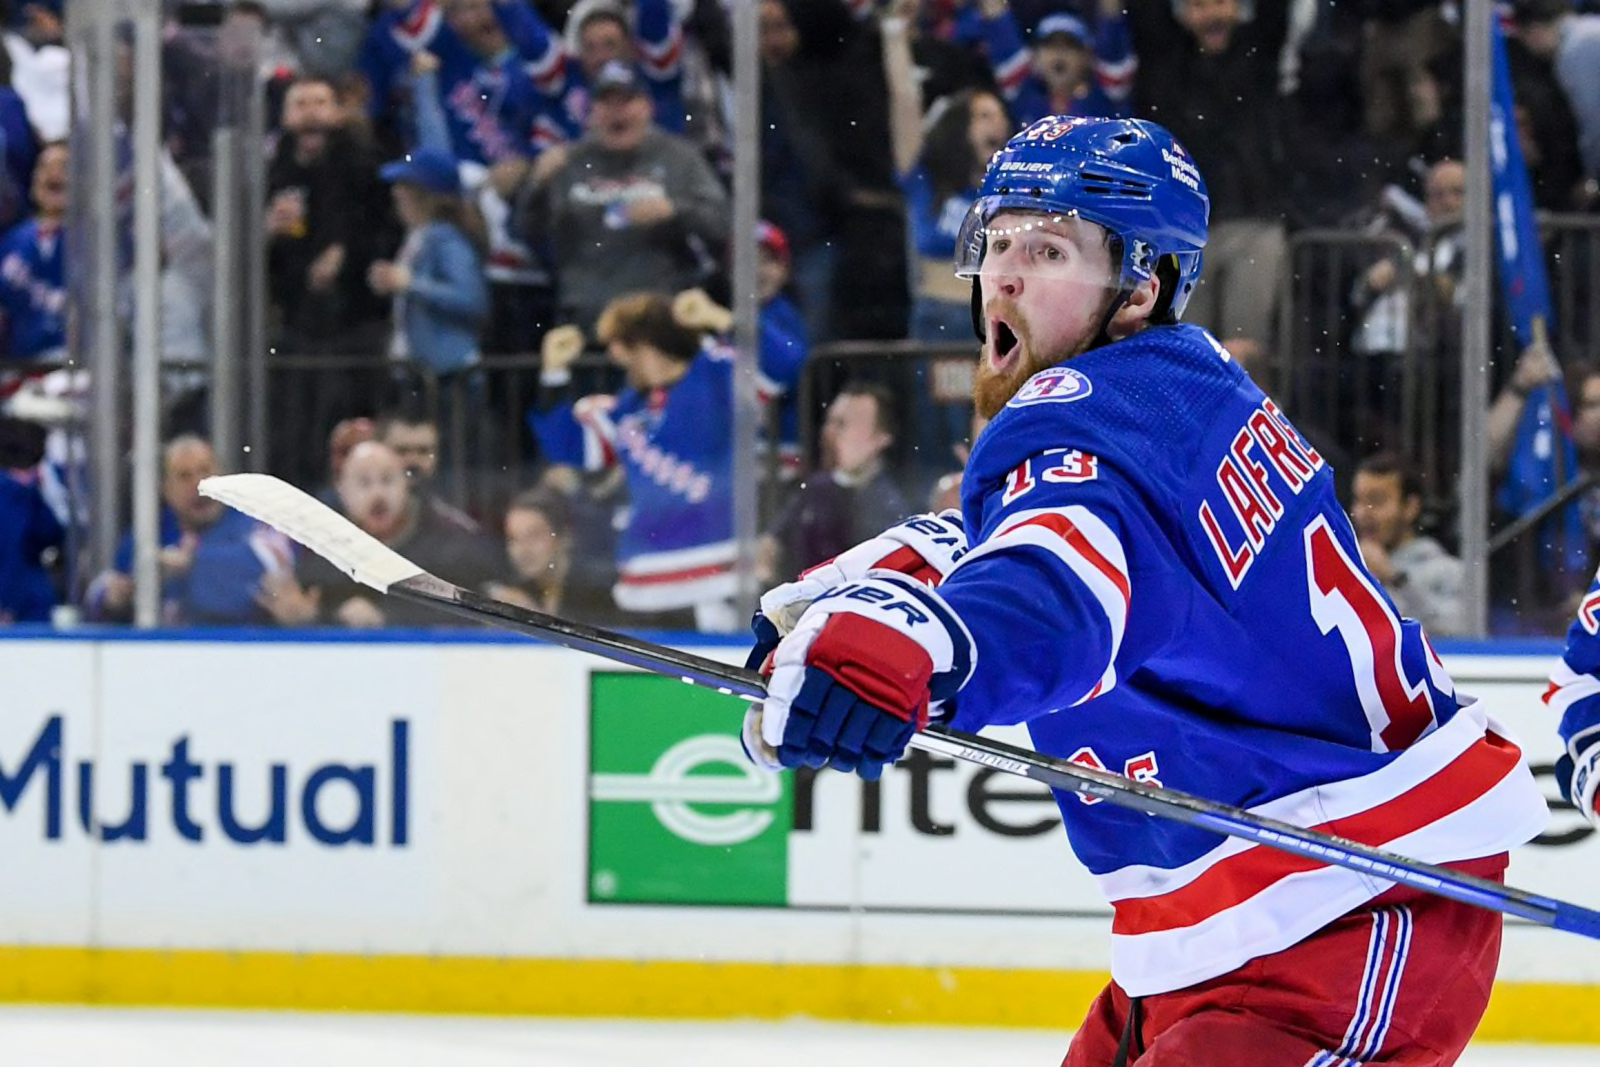 New York Rangers 5-3 comeback win to force Game 6